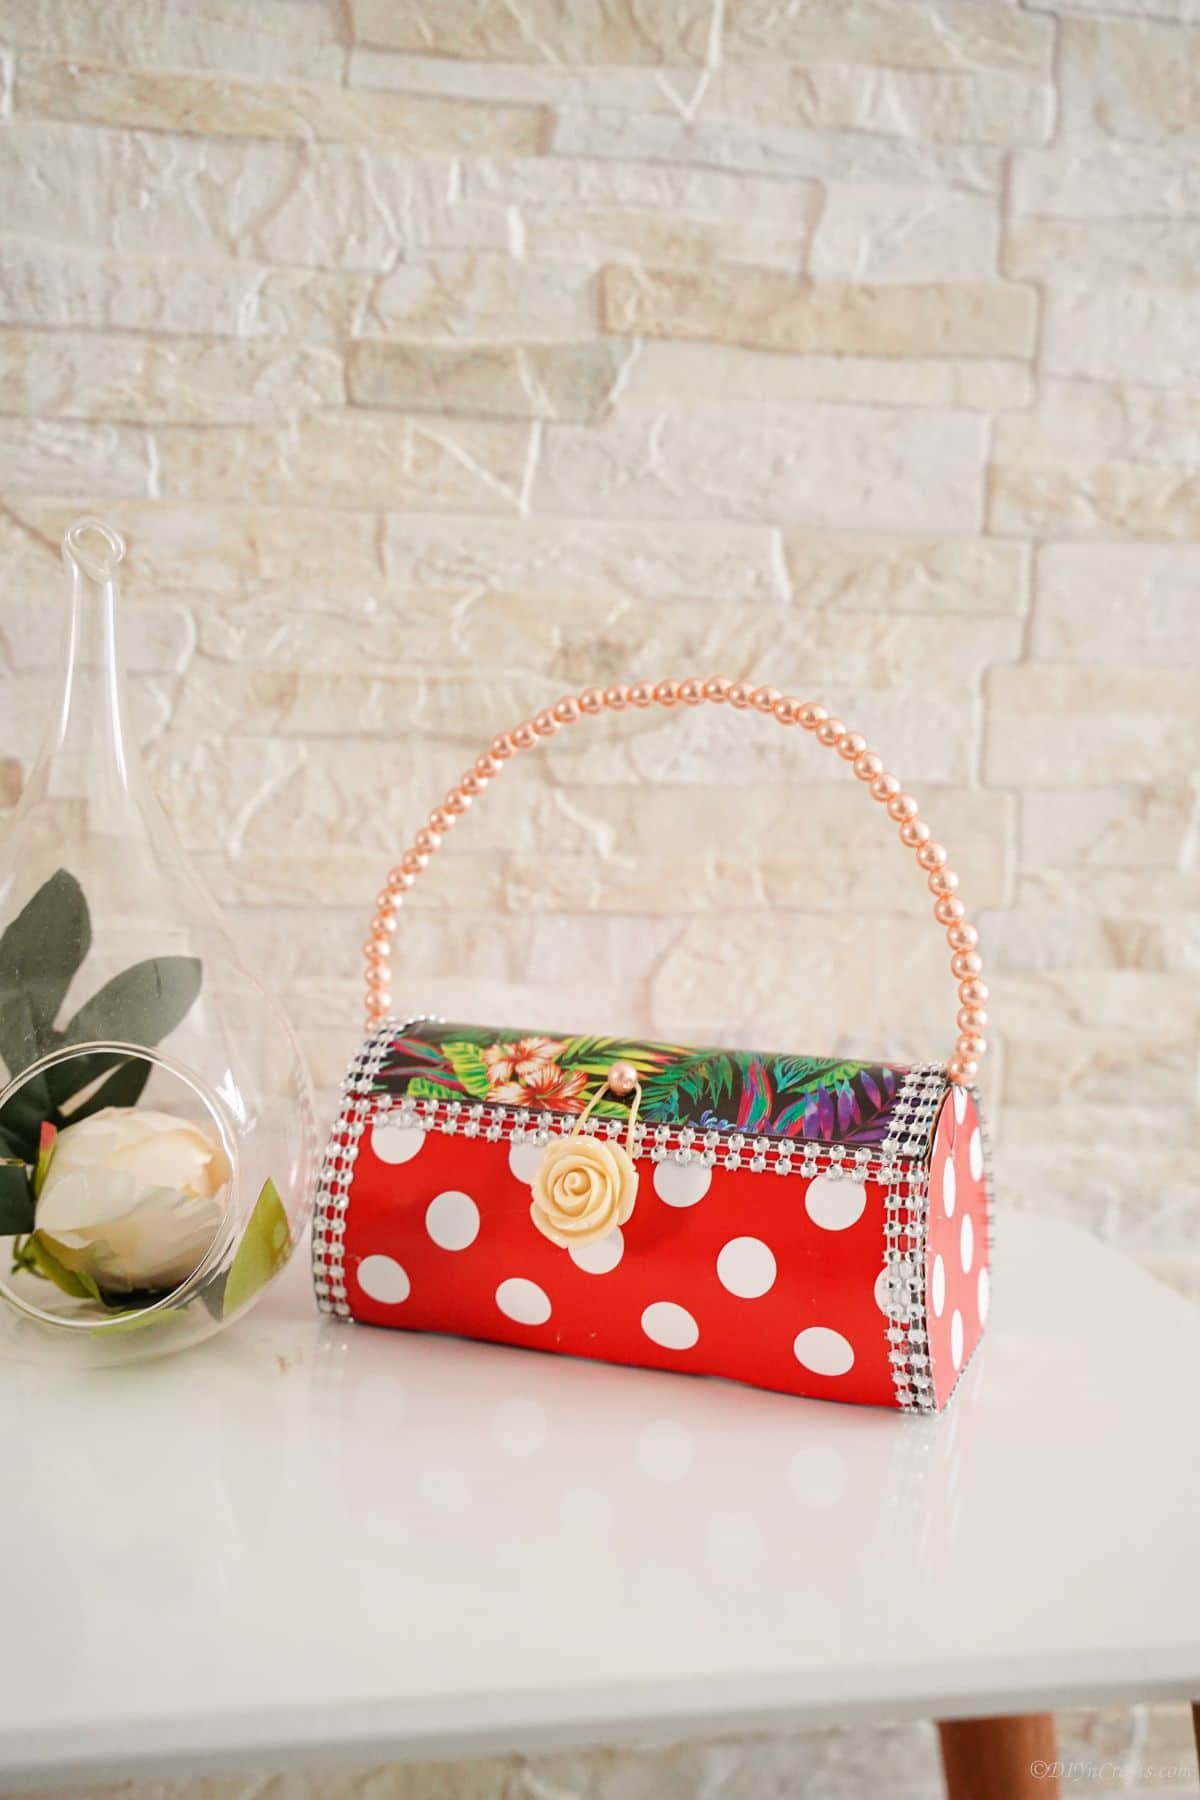 red and white purse on table with cream brick background